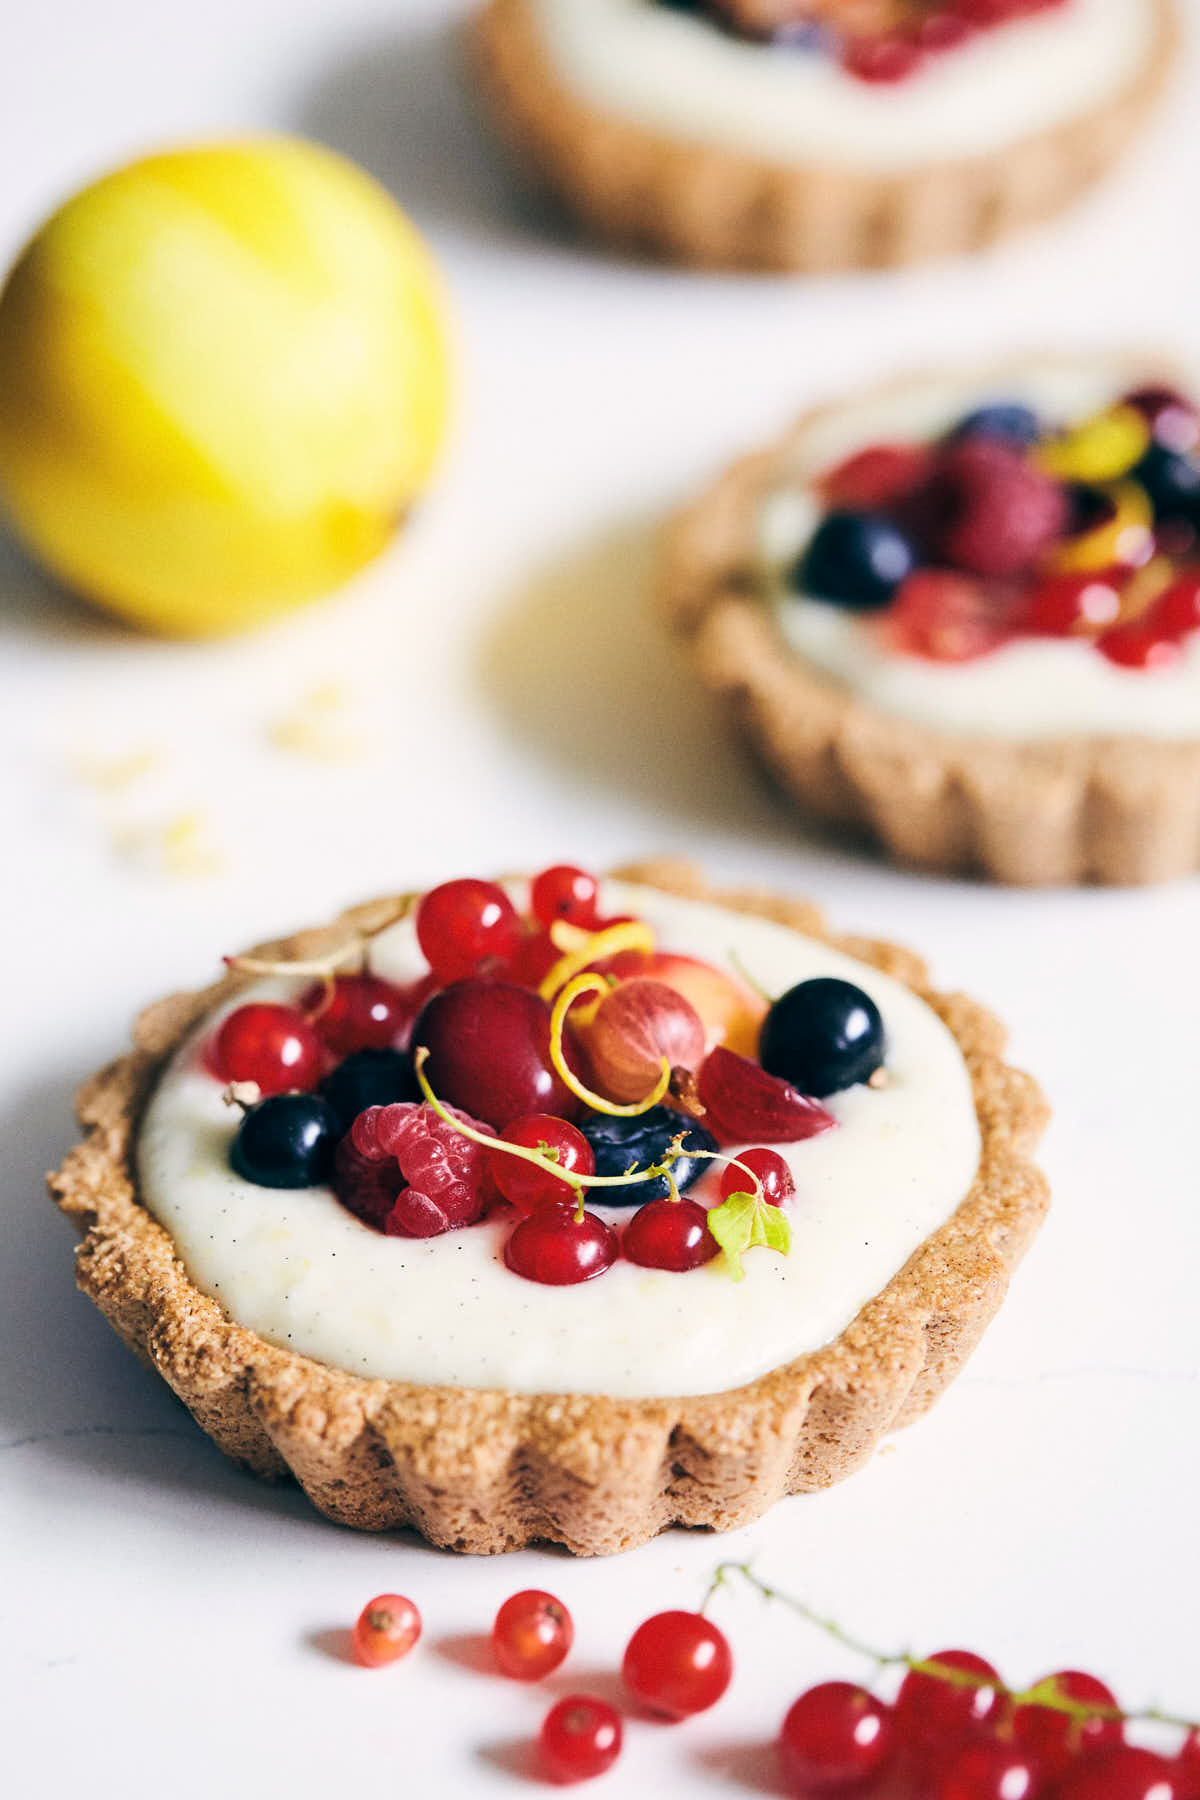 Berry tarts on a marble counter when lemon in background